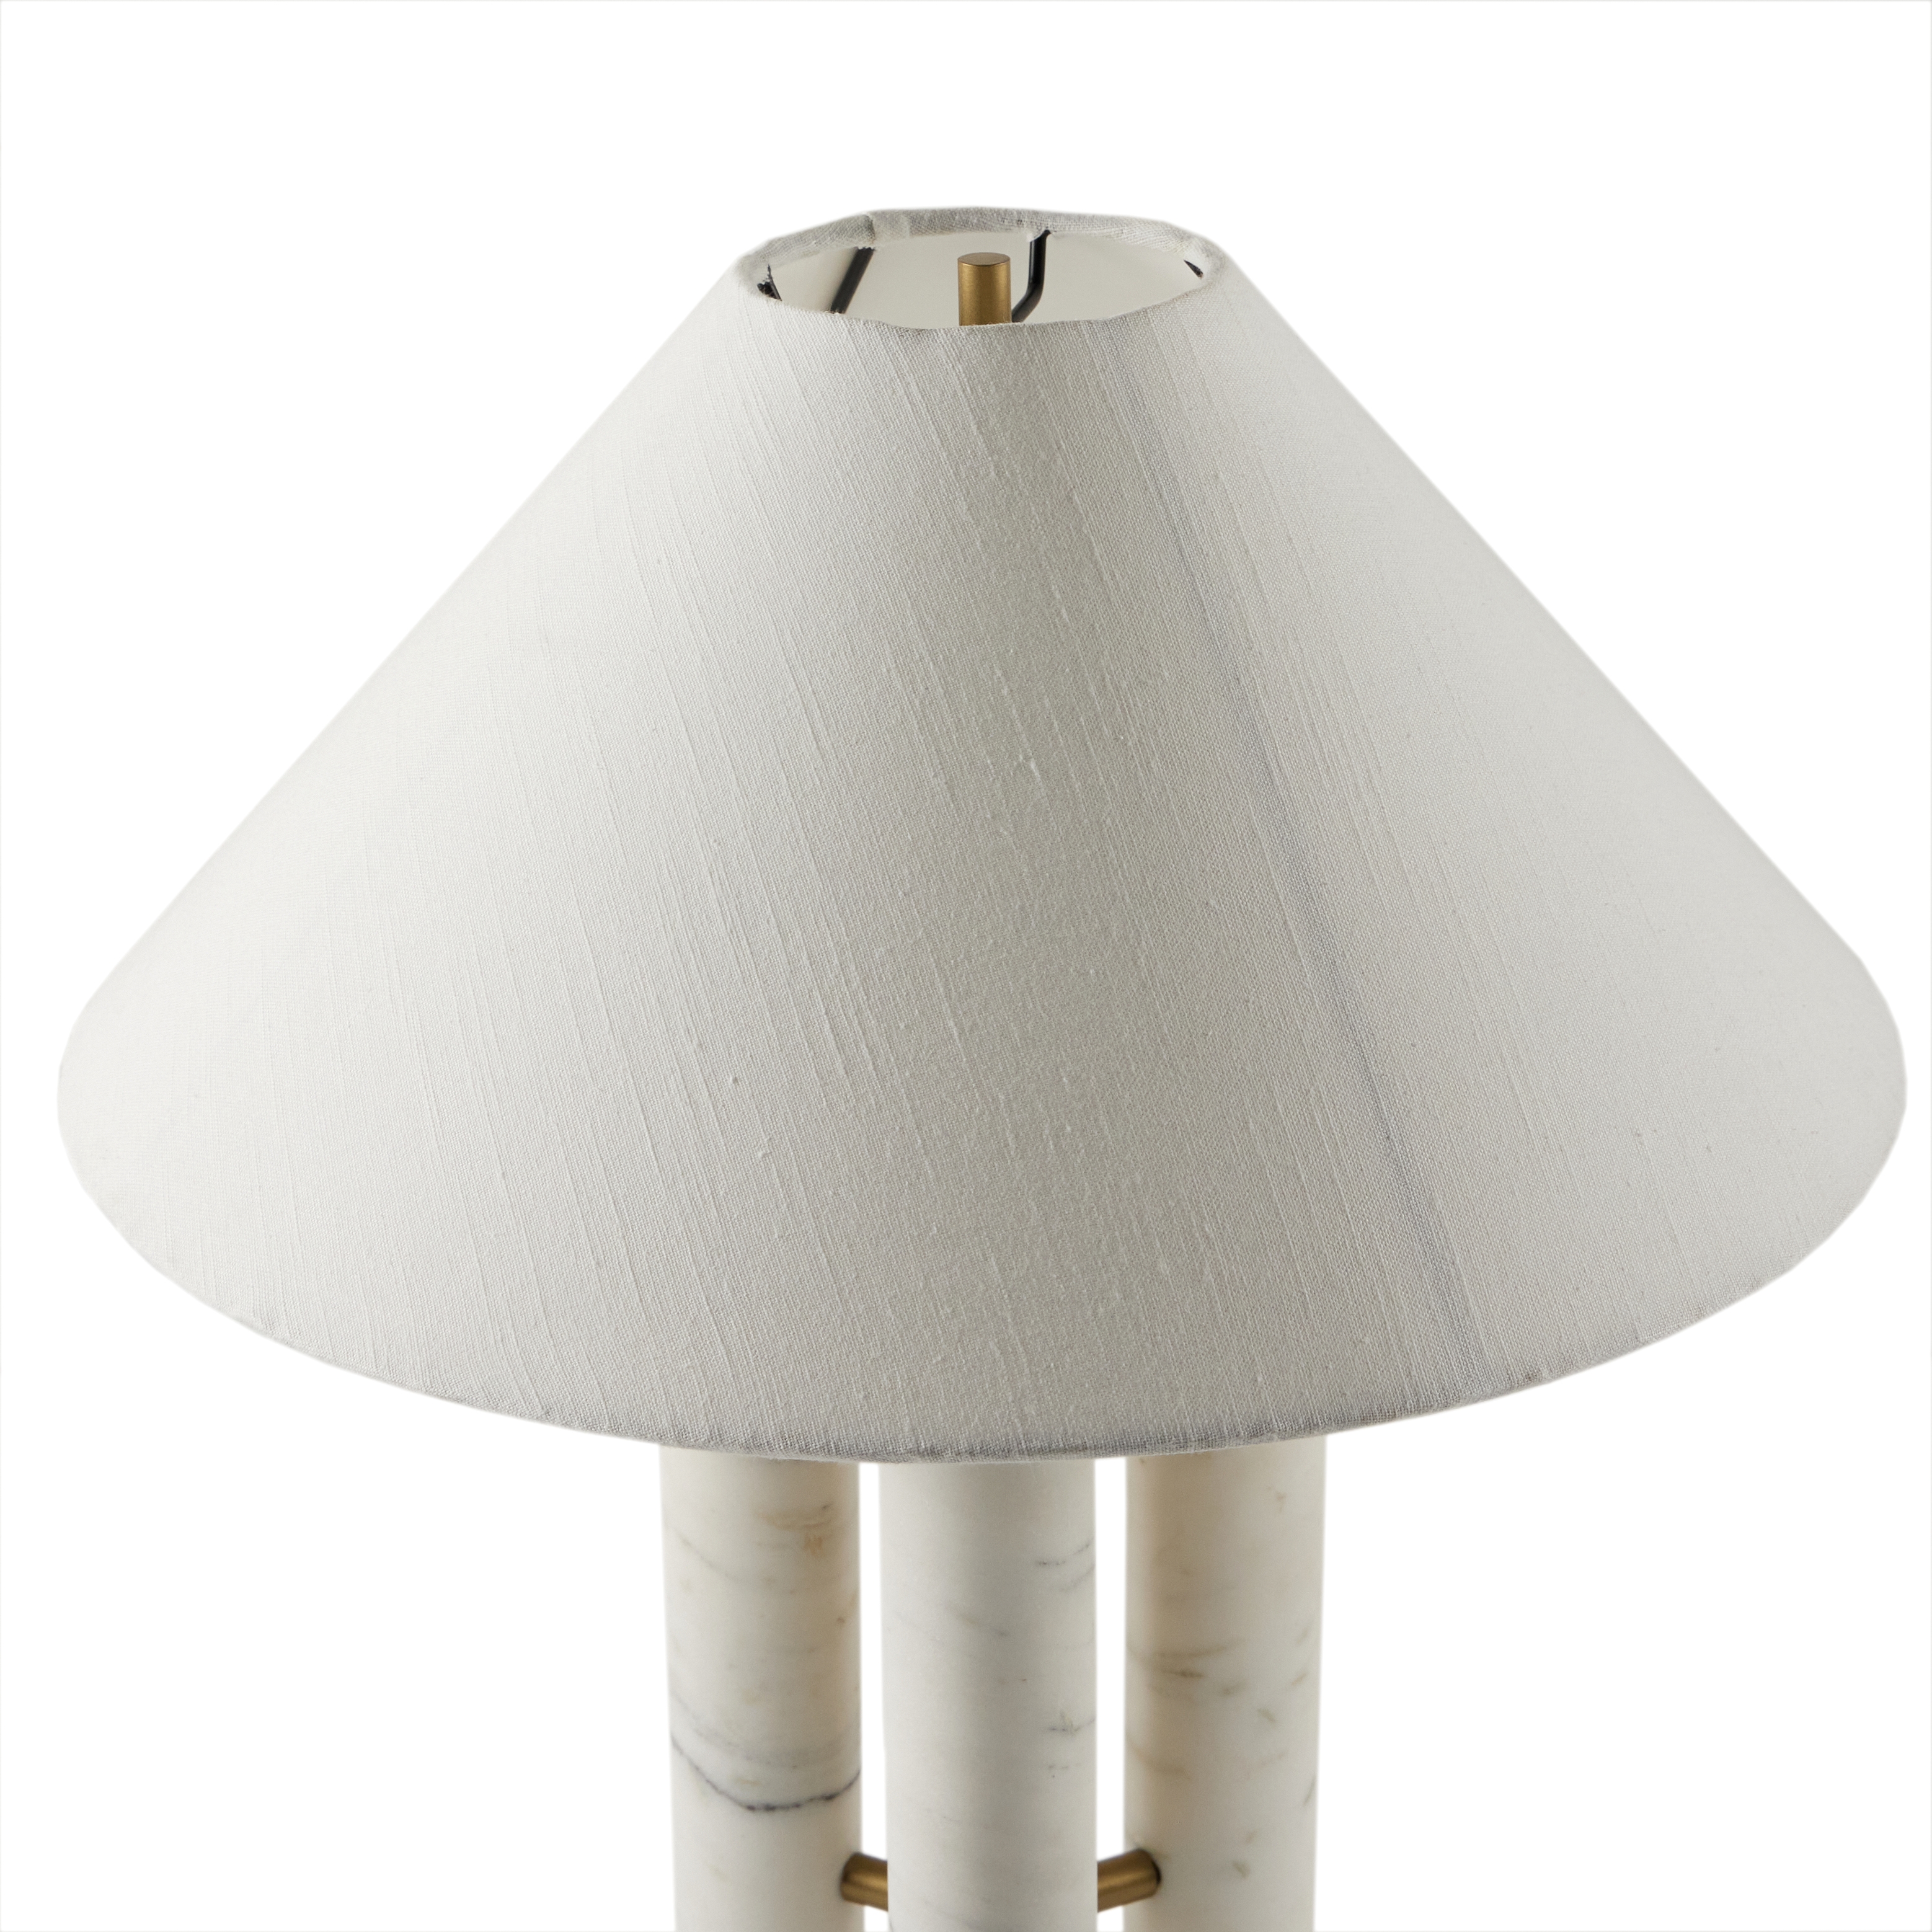 Medici Table Lamp-Chrcl And White Mrbl - Image 4